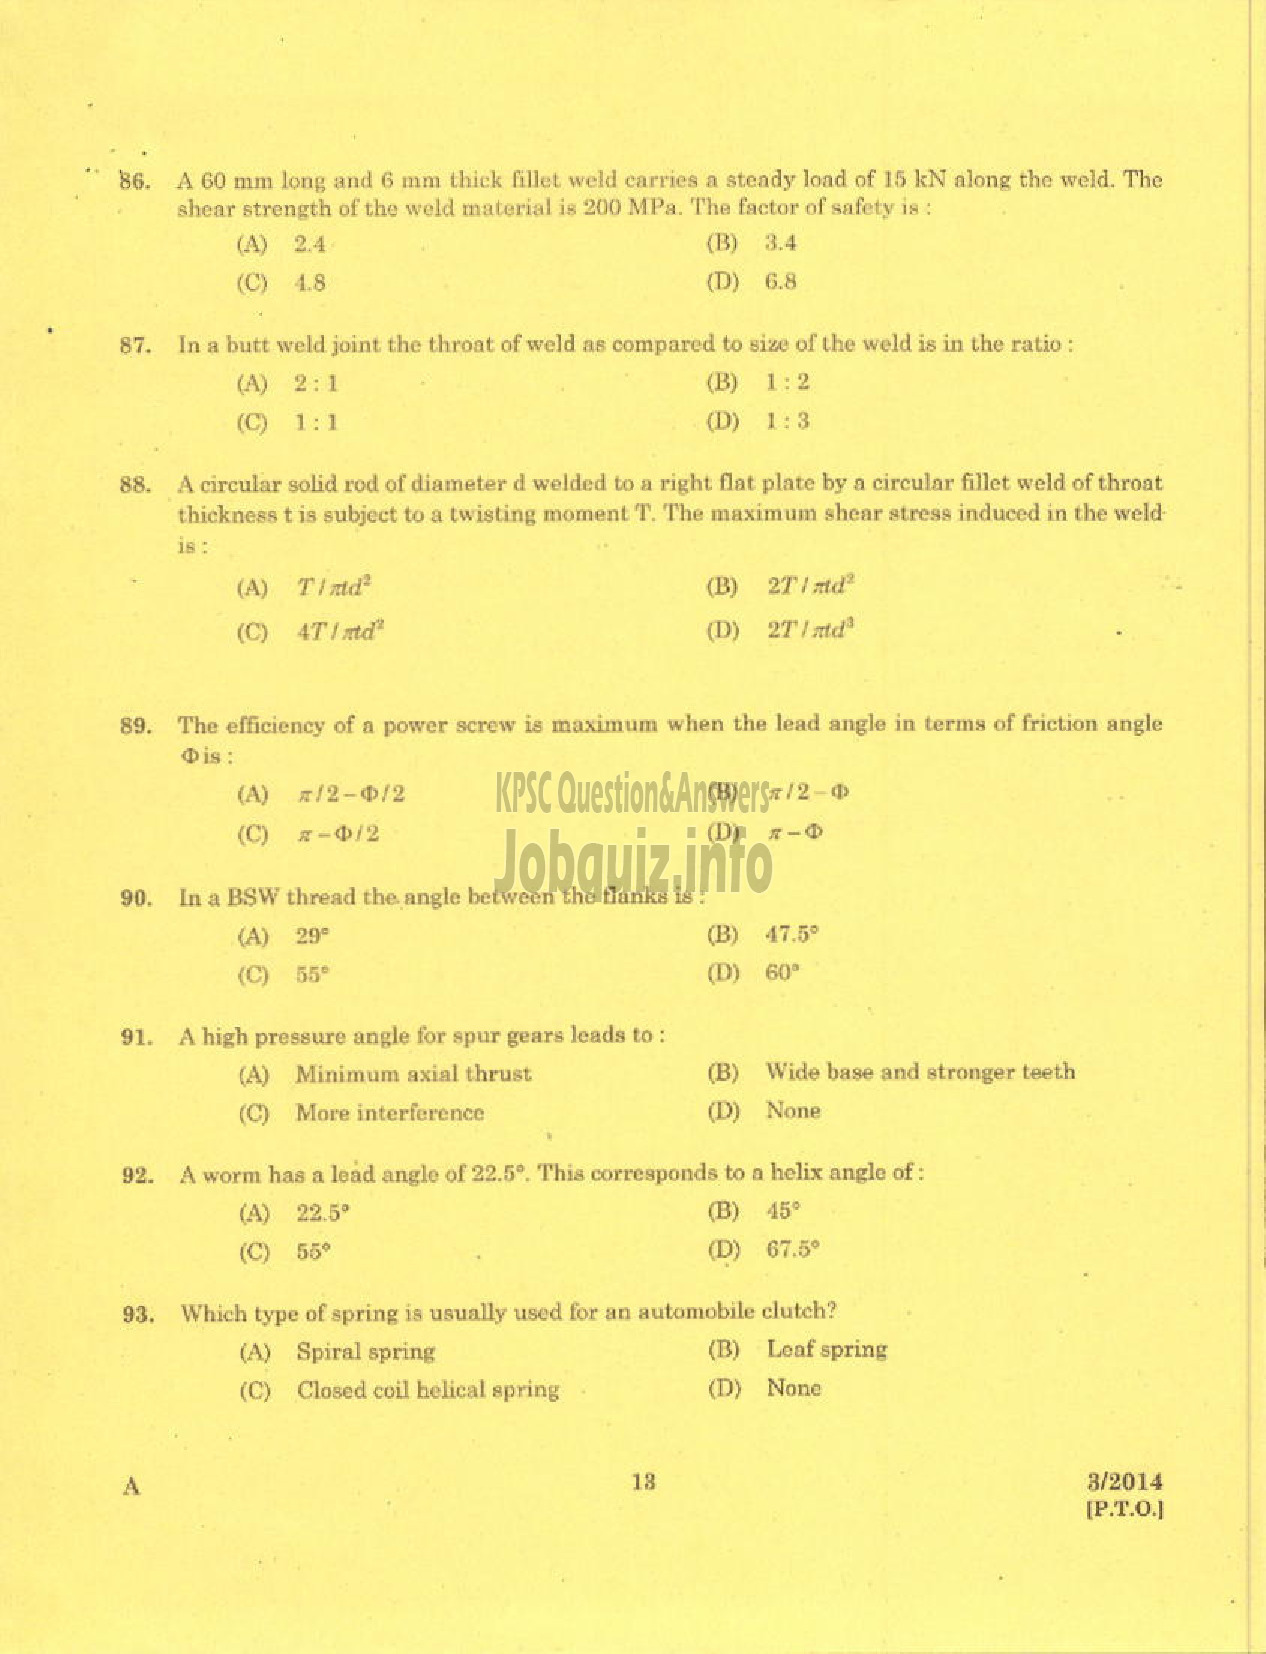 Kerala PSC Question Paper - LECTURER IN MACHANICAL ENGINEERING POLYTECHNICS TECHNICAL EDUCATION-11